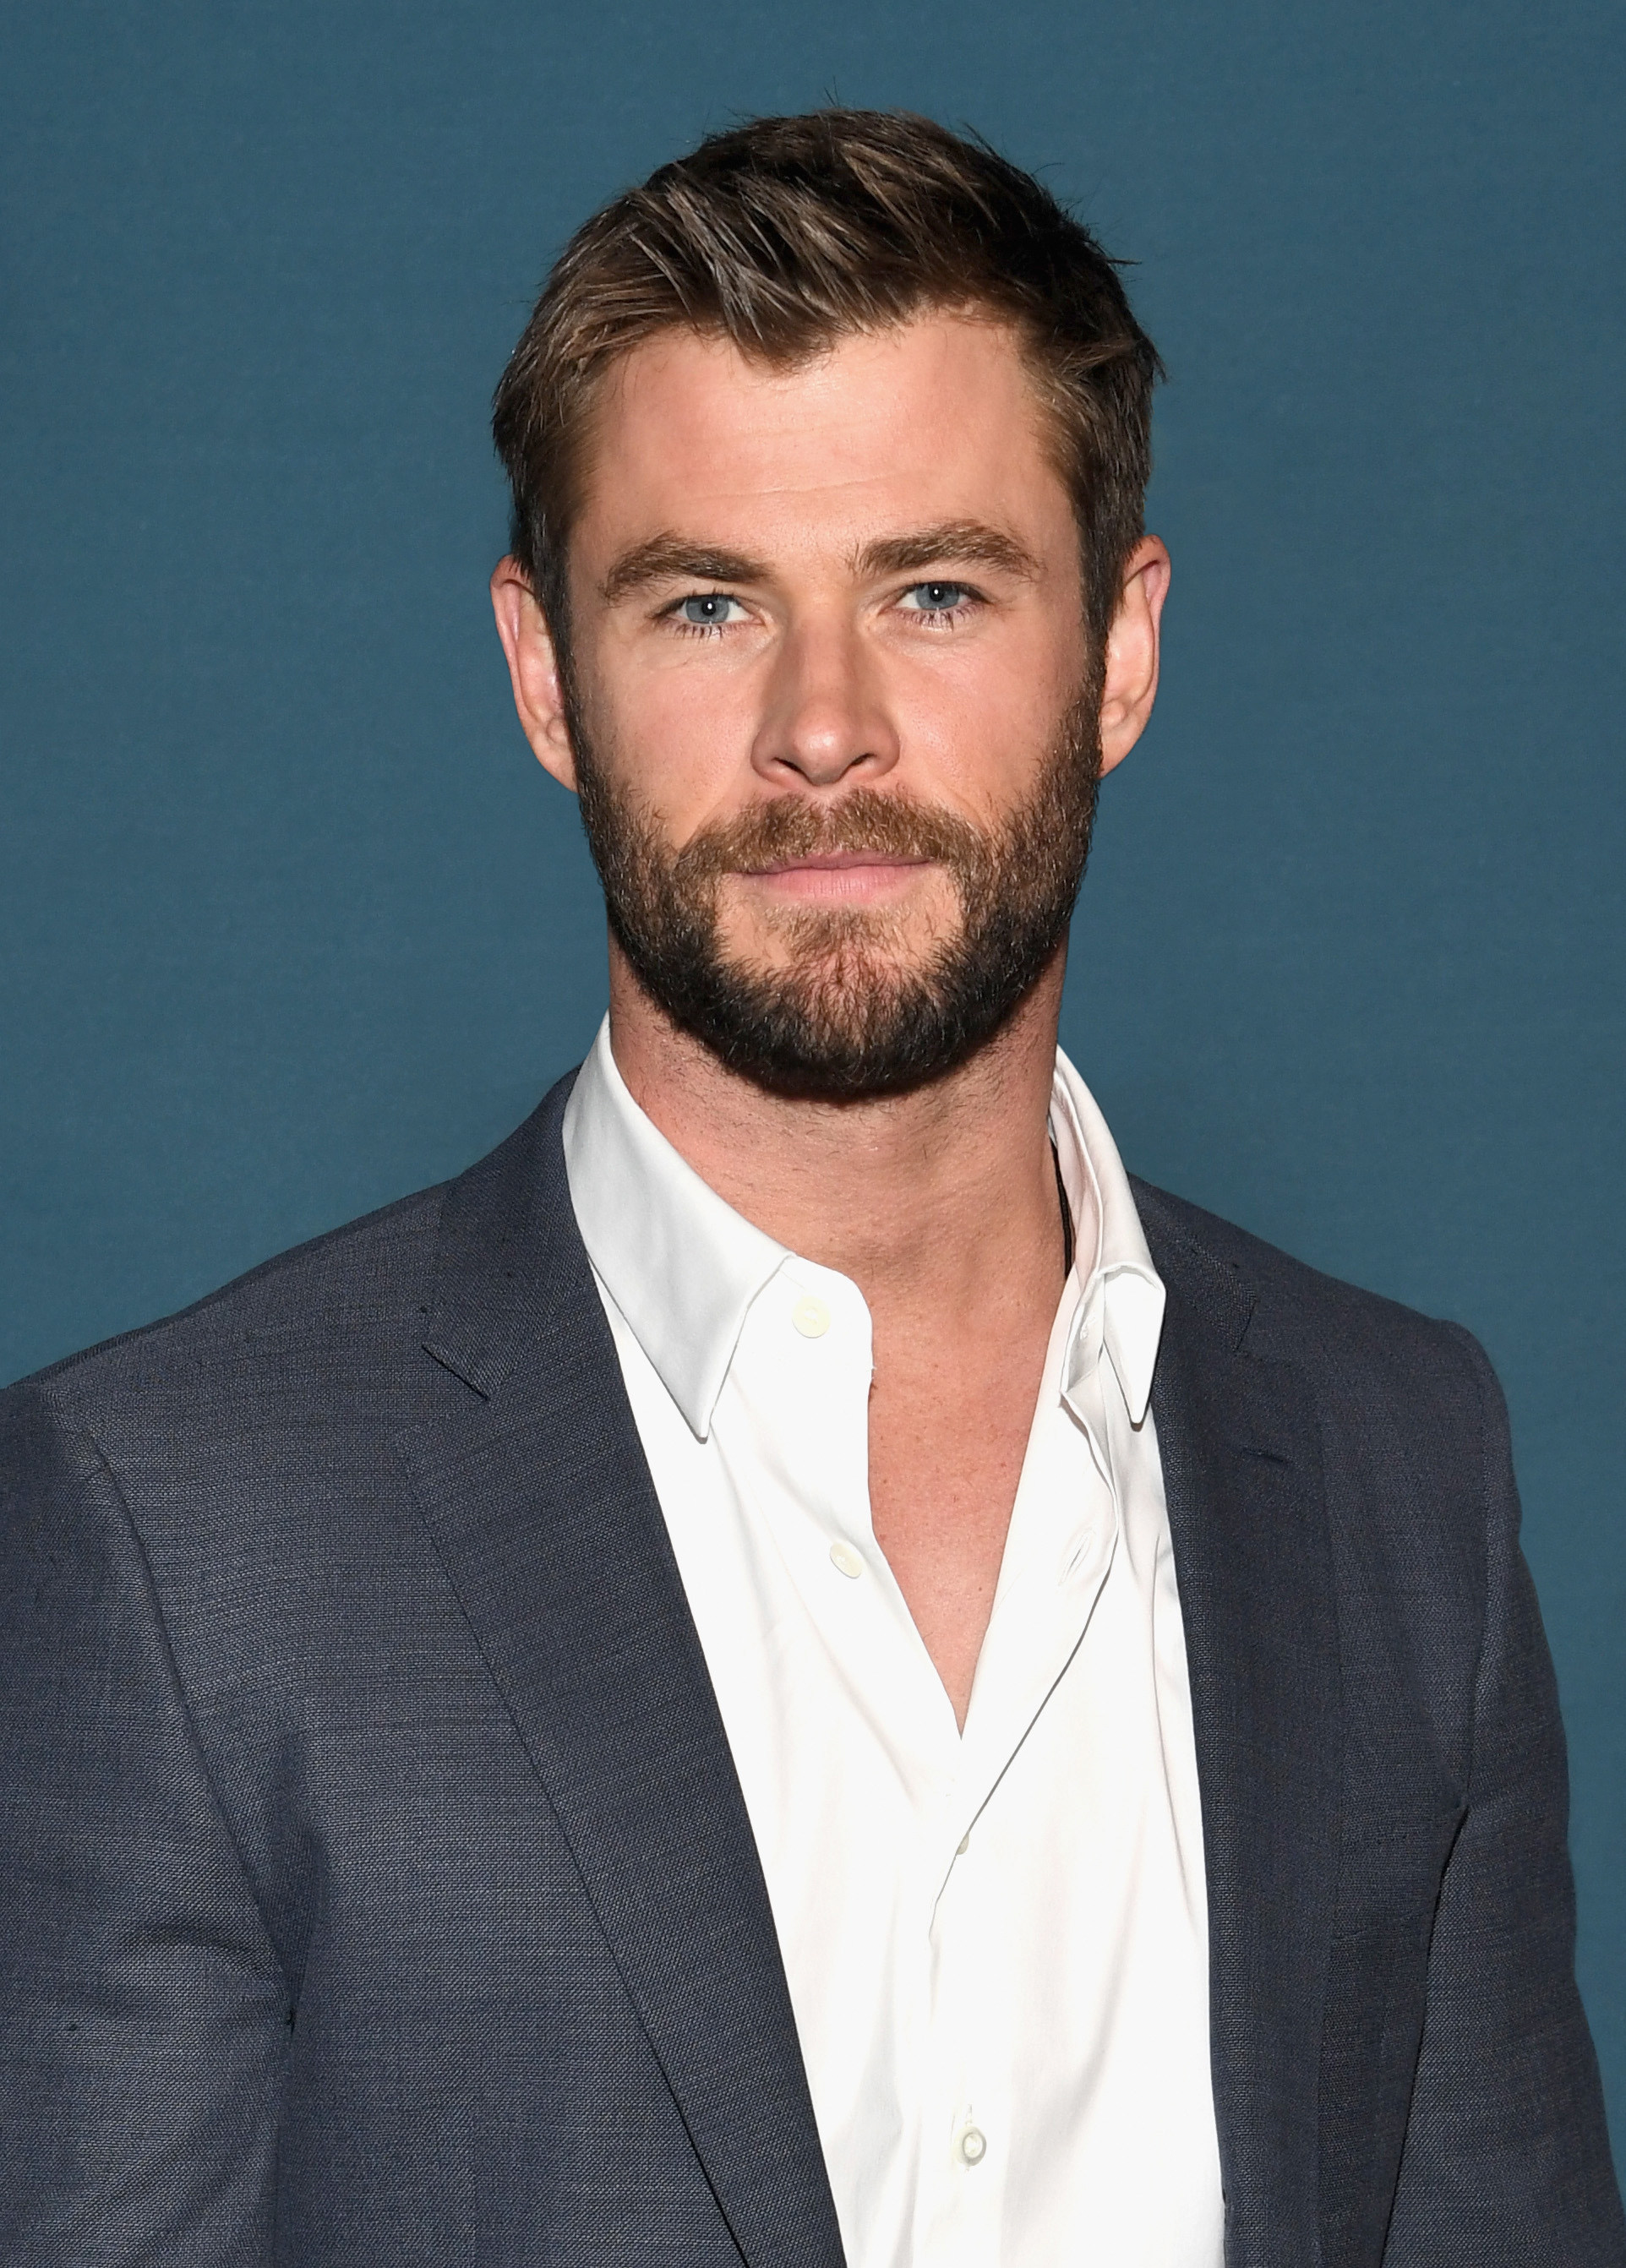 Chris Hemsworth Set to Inspire Health and Happiness with Swisse Wellness